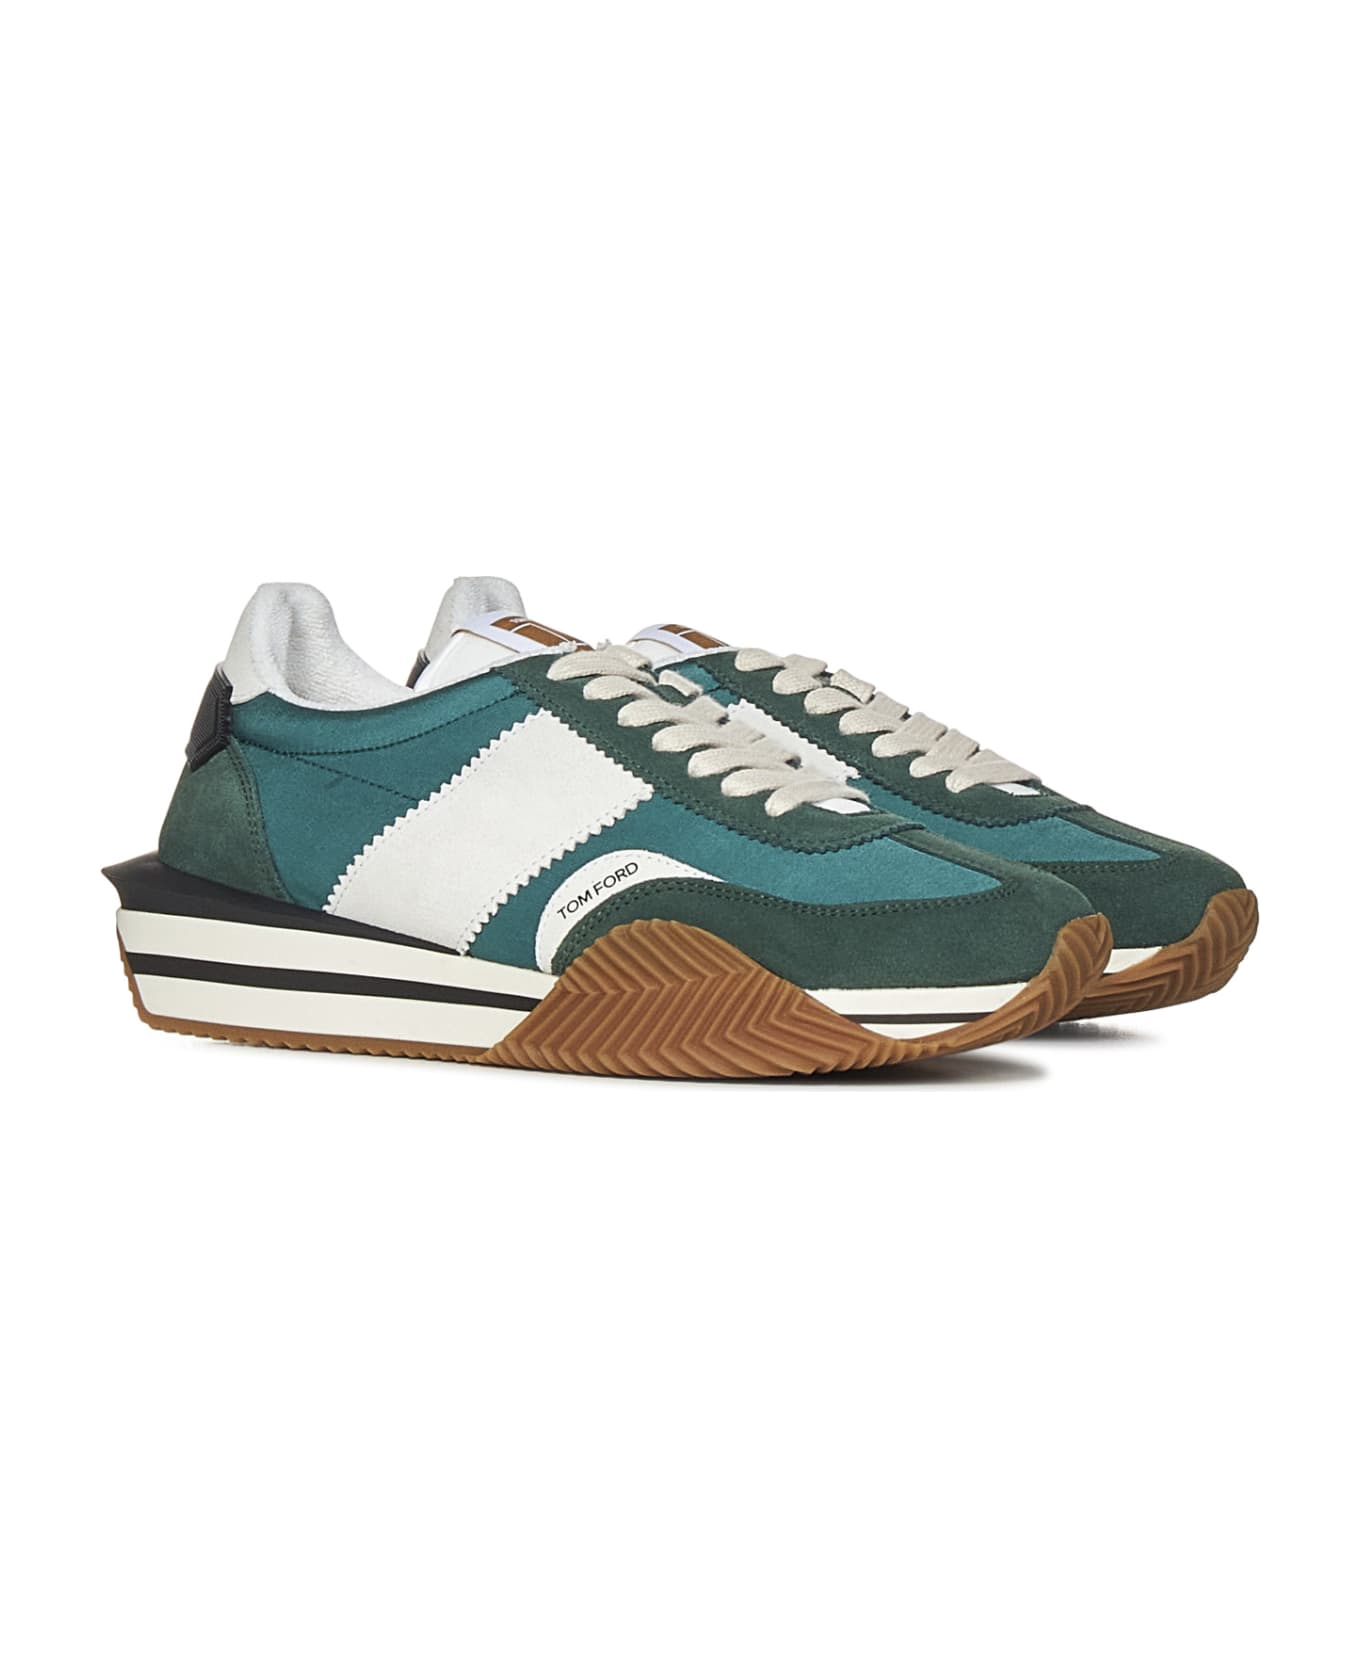 Tom Ford James Sneakers - Green